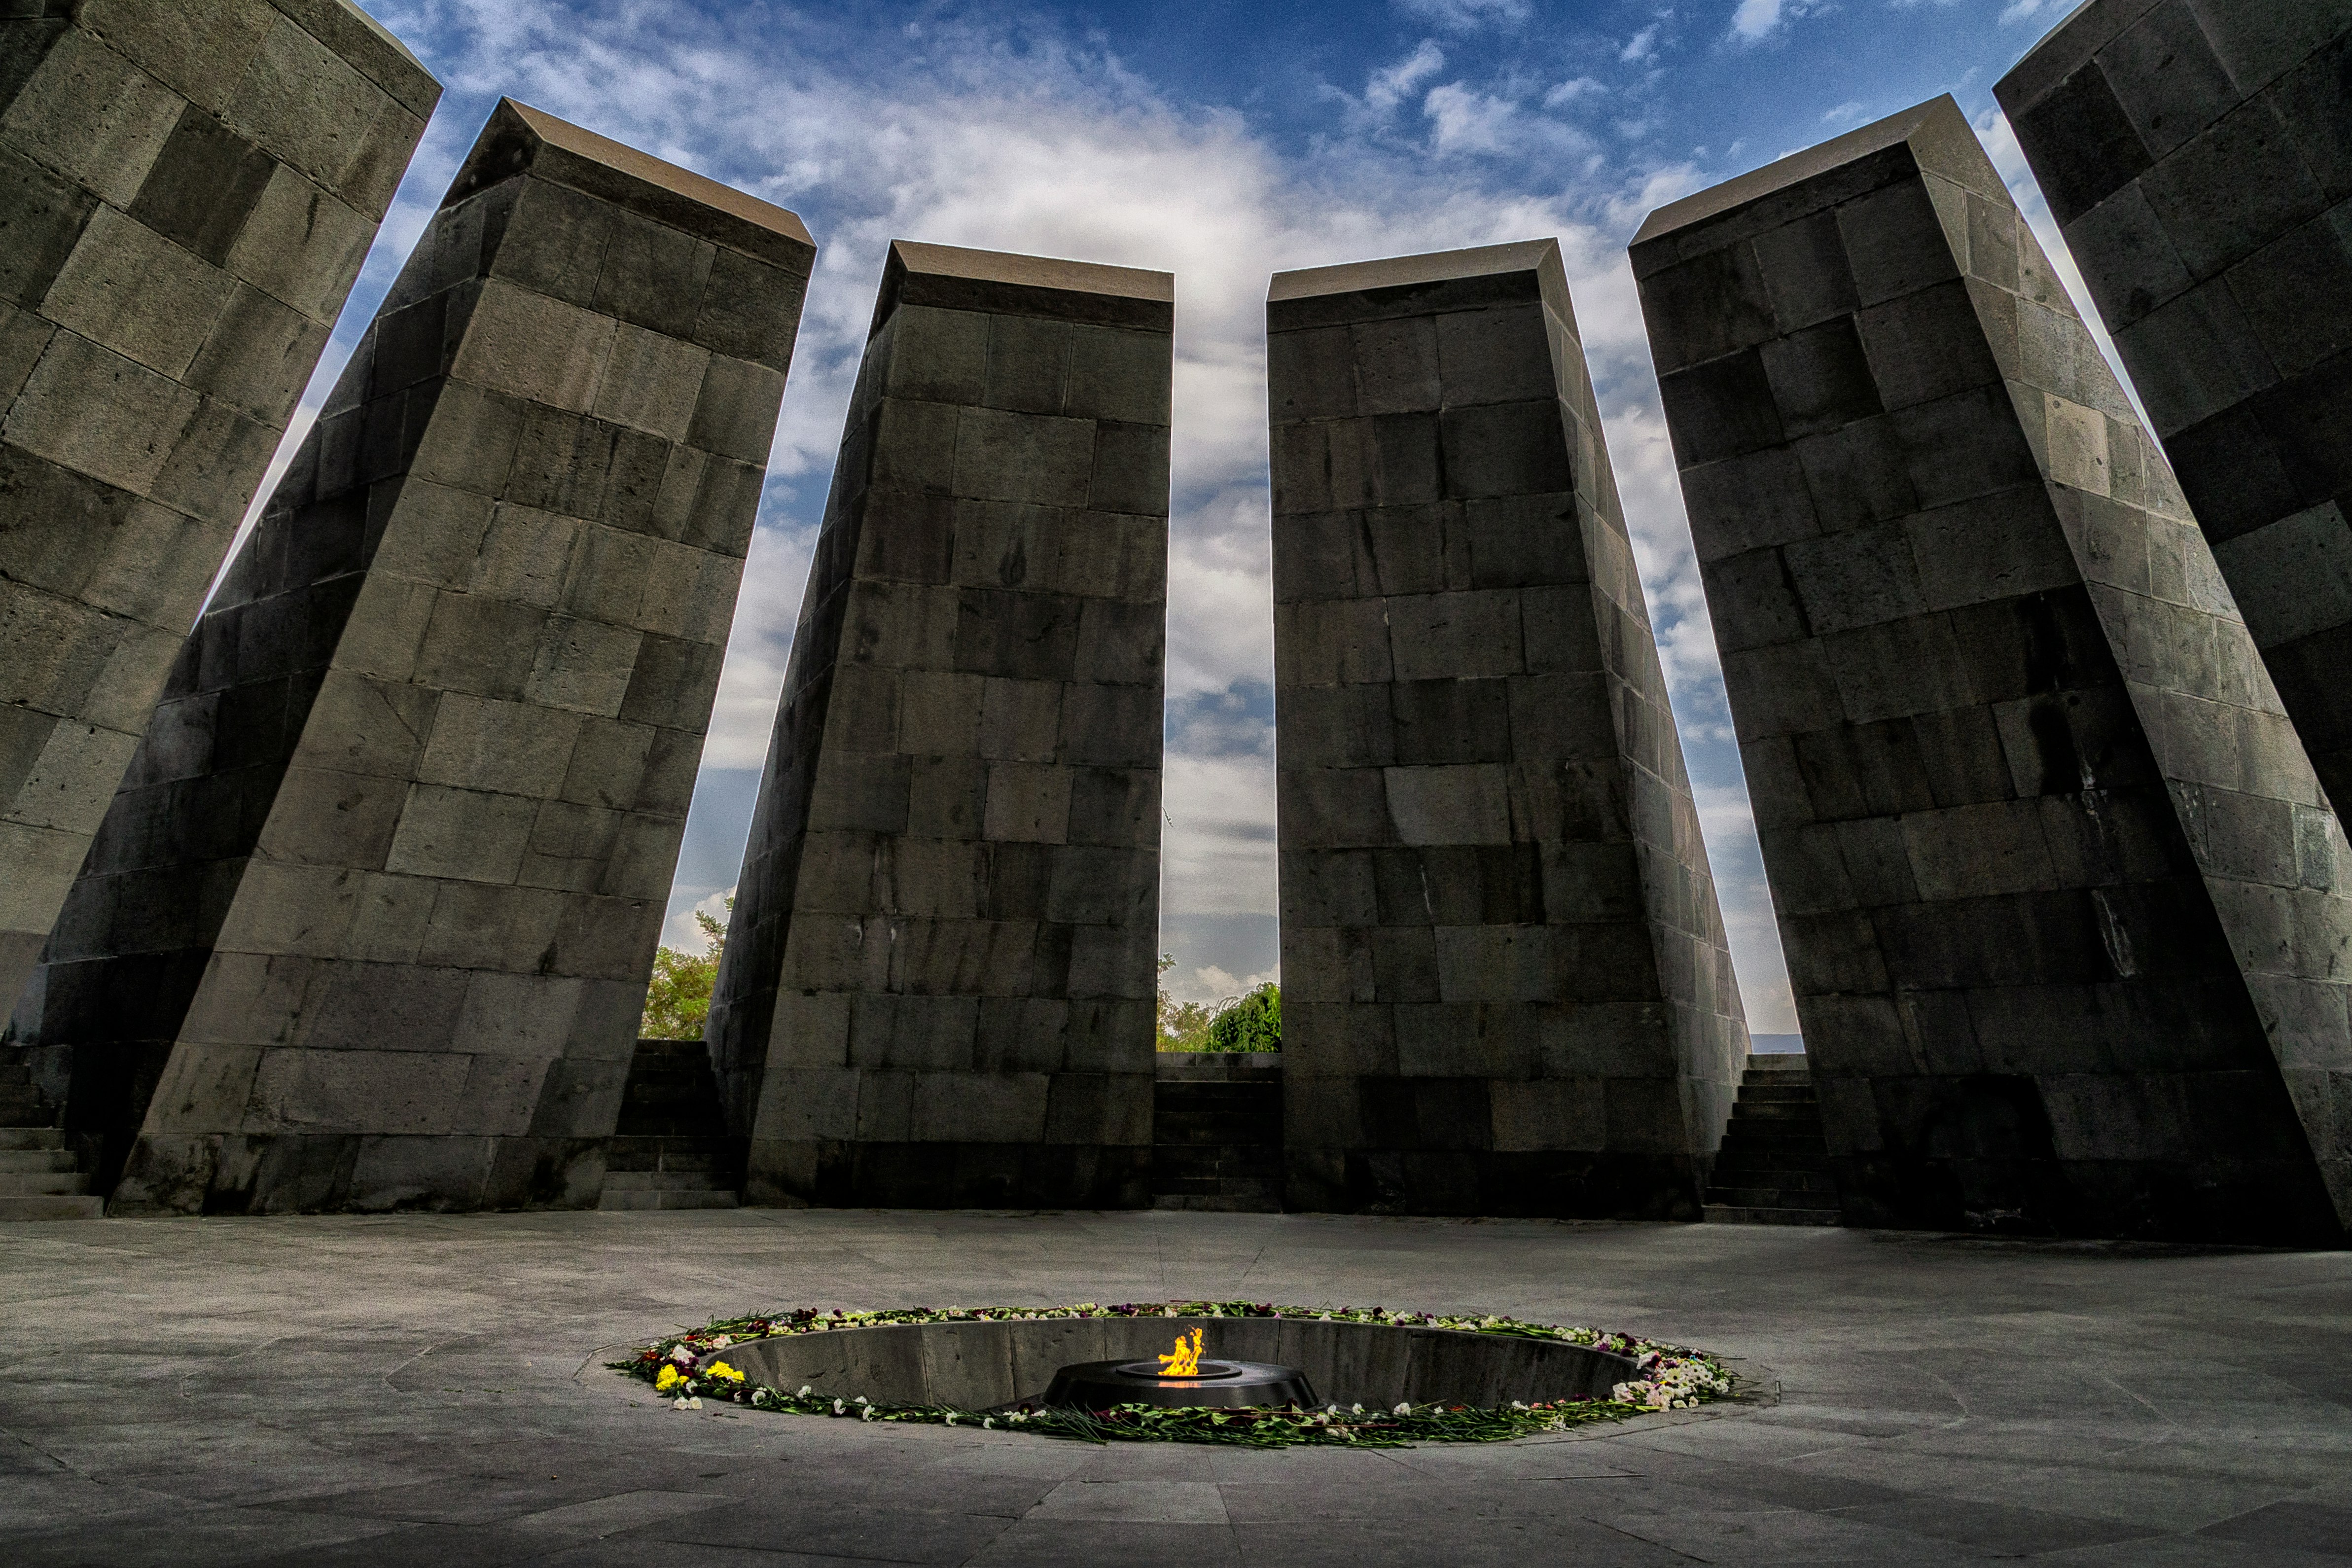 The Armenian Genocide memorial complex is Armenia’s official memorial dedicated to the victims of the Armenian Genocide, built in 1967 on the hill of Tsitsernakaberd in Yerevan.